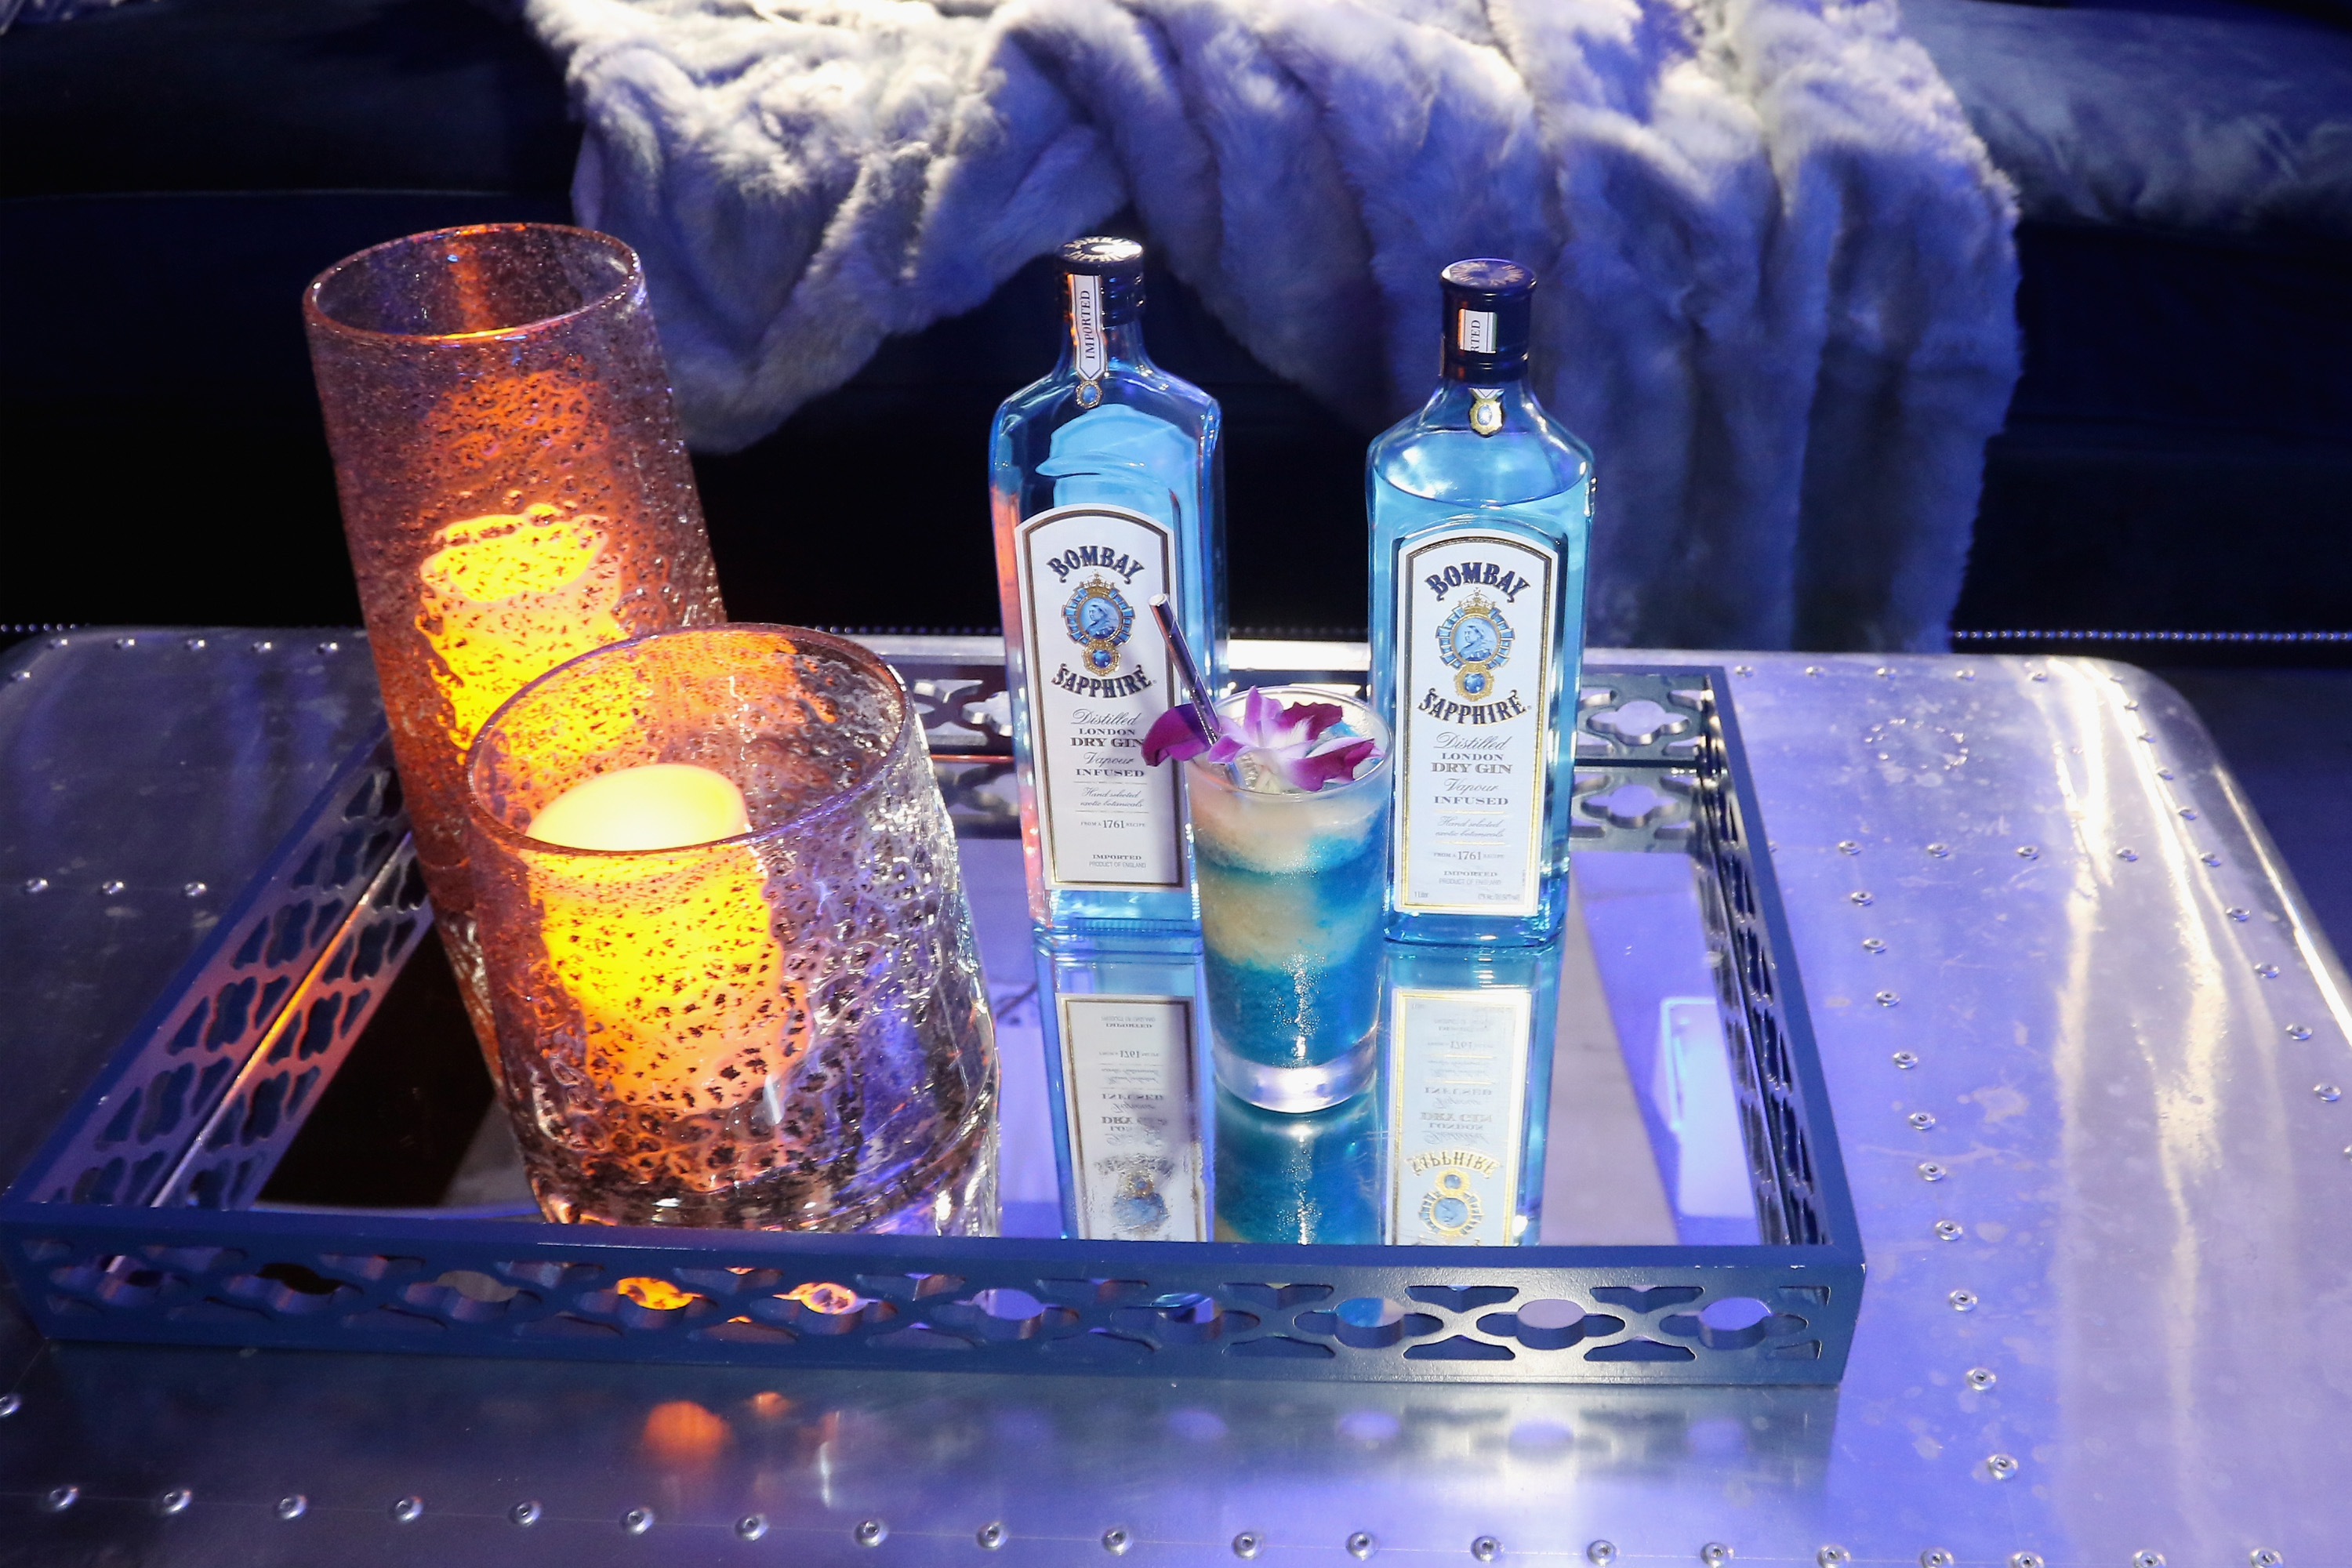 7th Annual Bombay Sapphire Artisan Series Finale Hosted By Russell And Danny Simmons